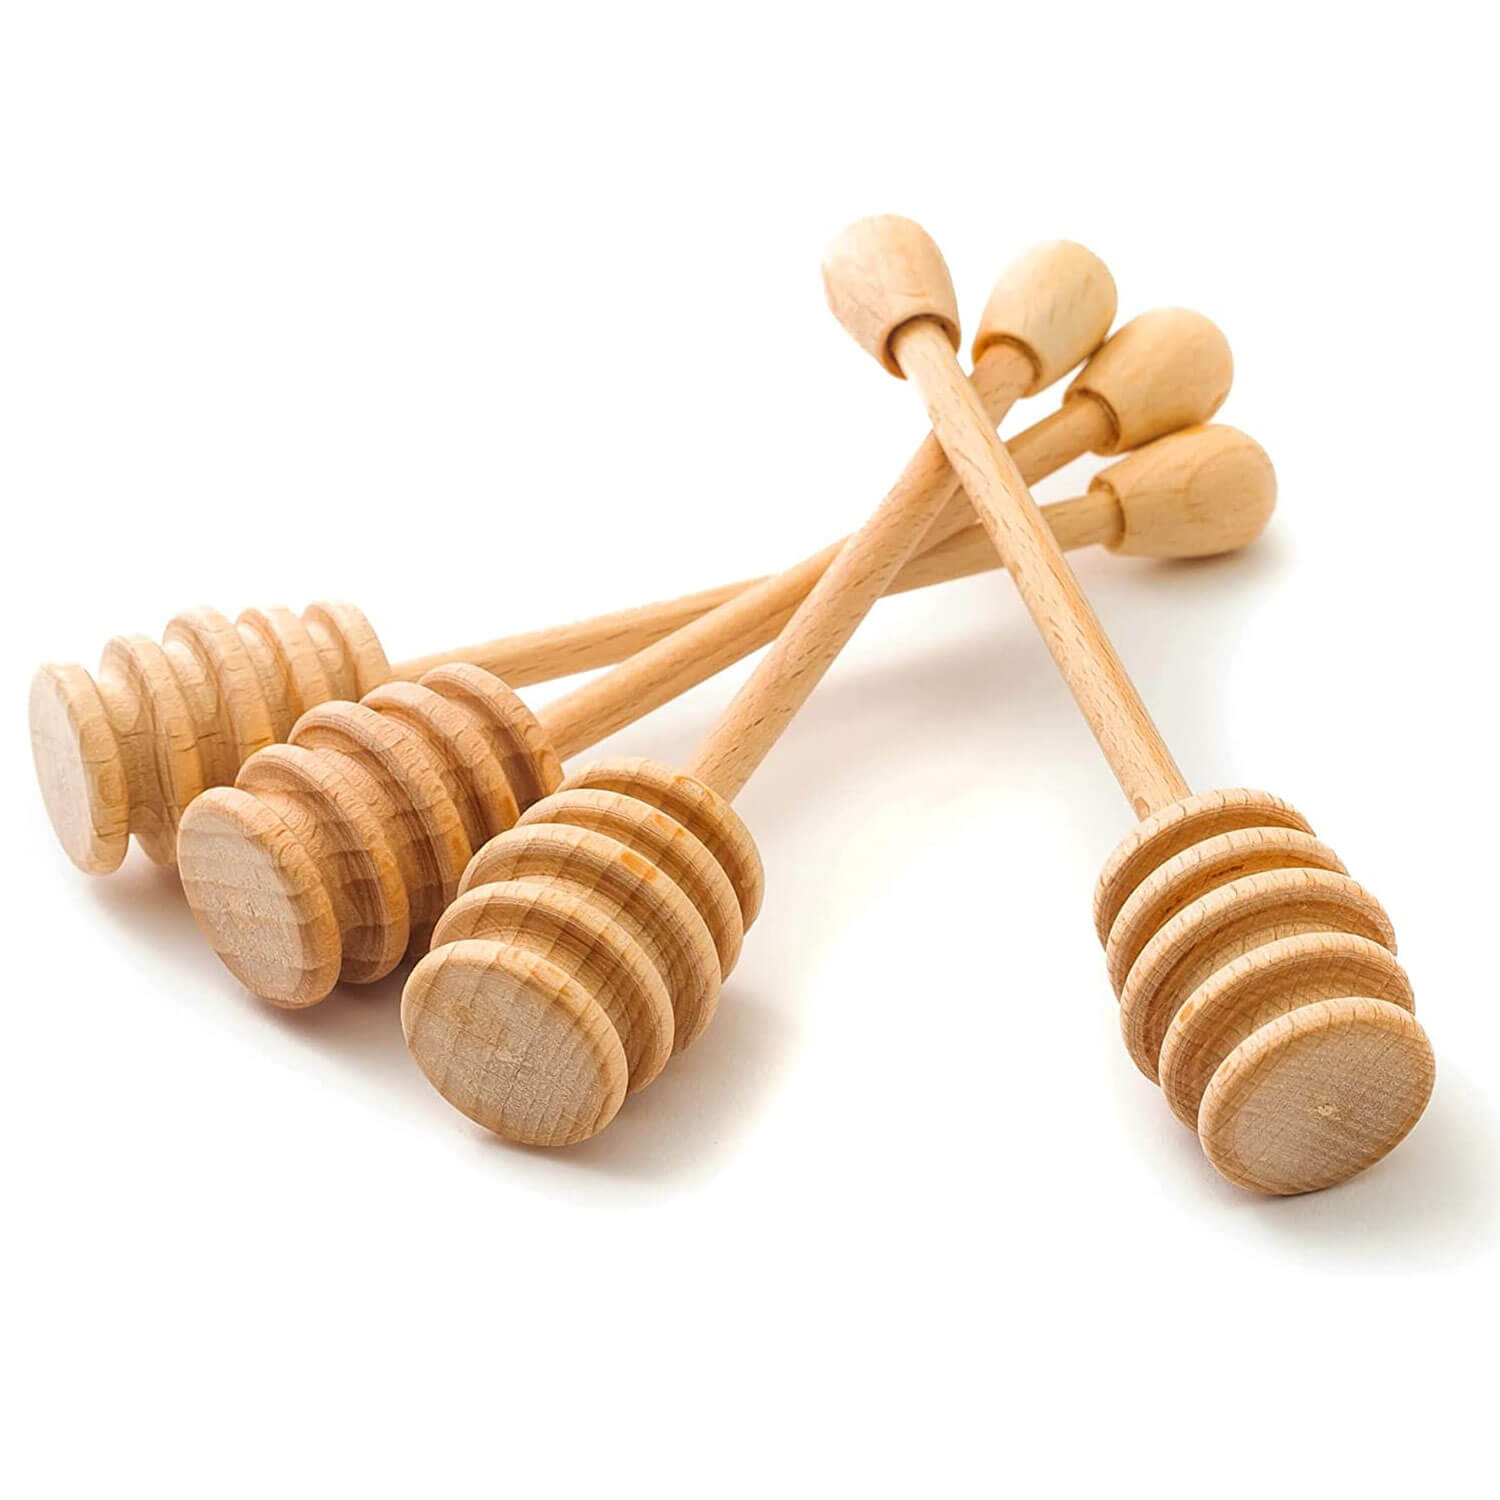 https://cdn.shopify.com/s/files/1/0515/2440/3381/products/set-of-4-wooden-honey-spoons-dipper-15-cm-tuuli-kitchen-866.jpg